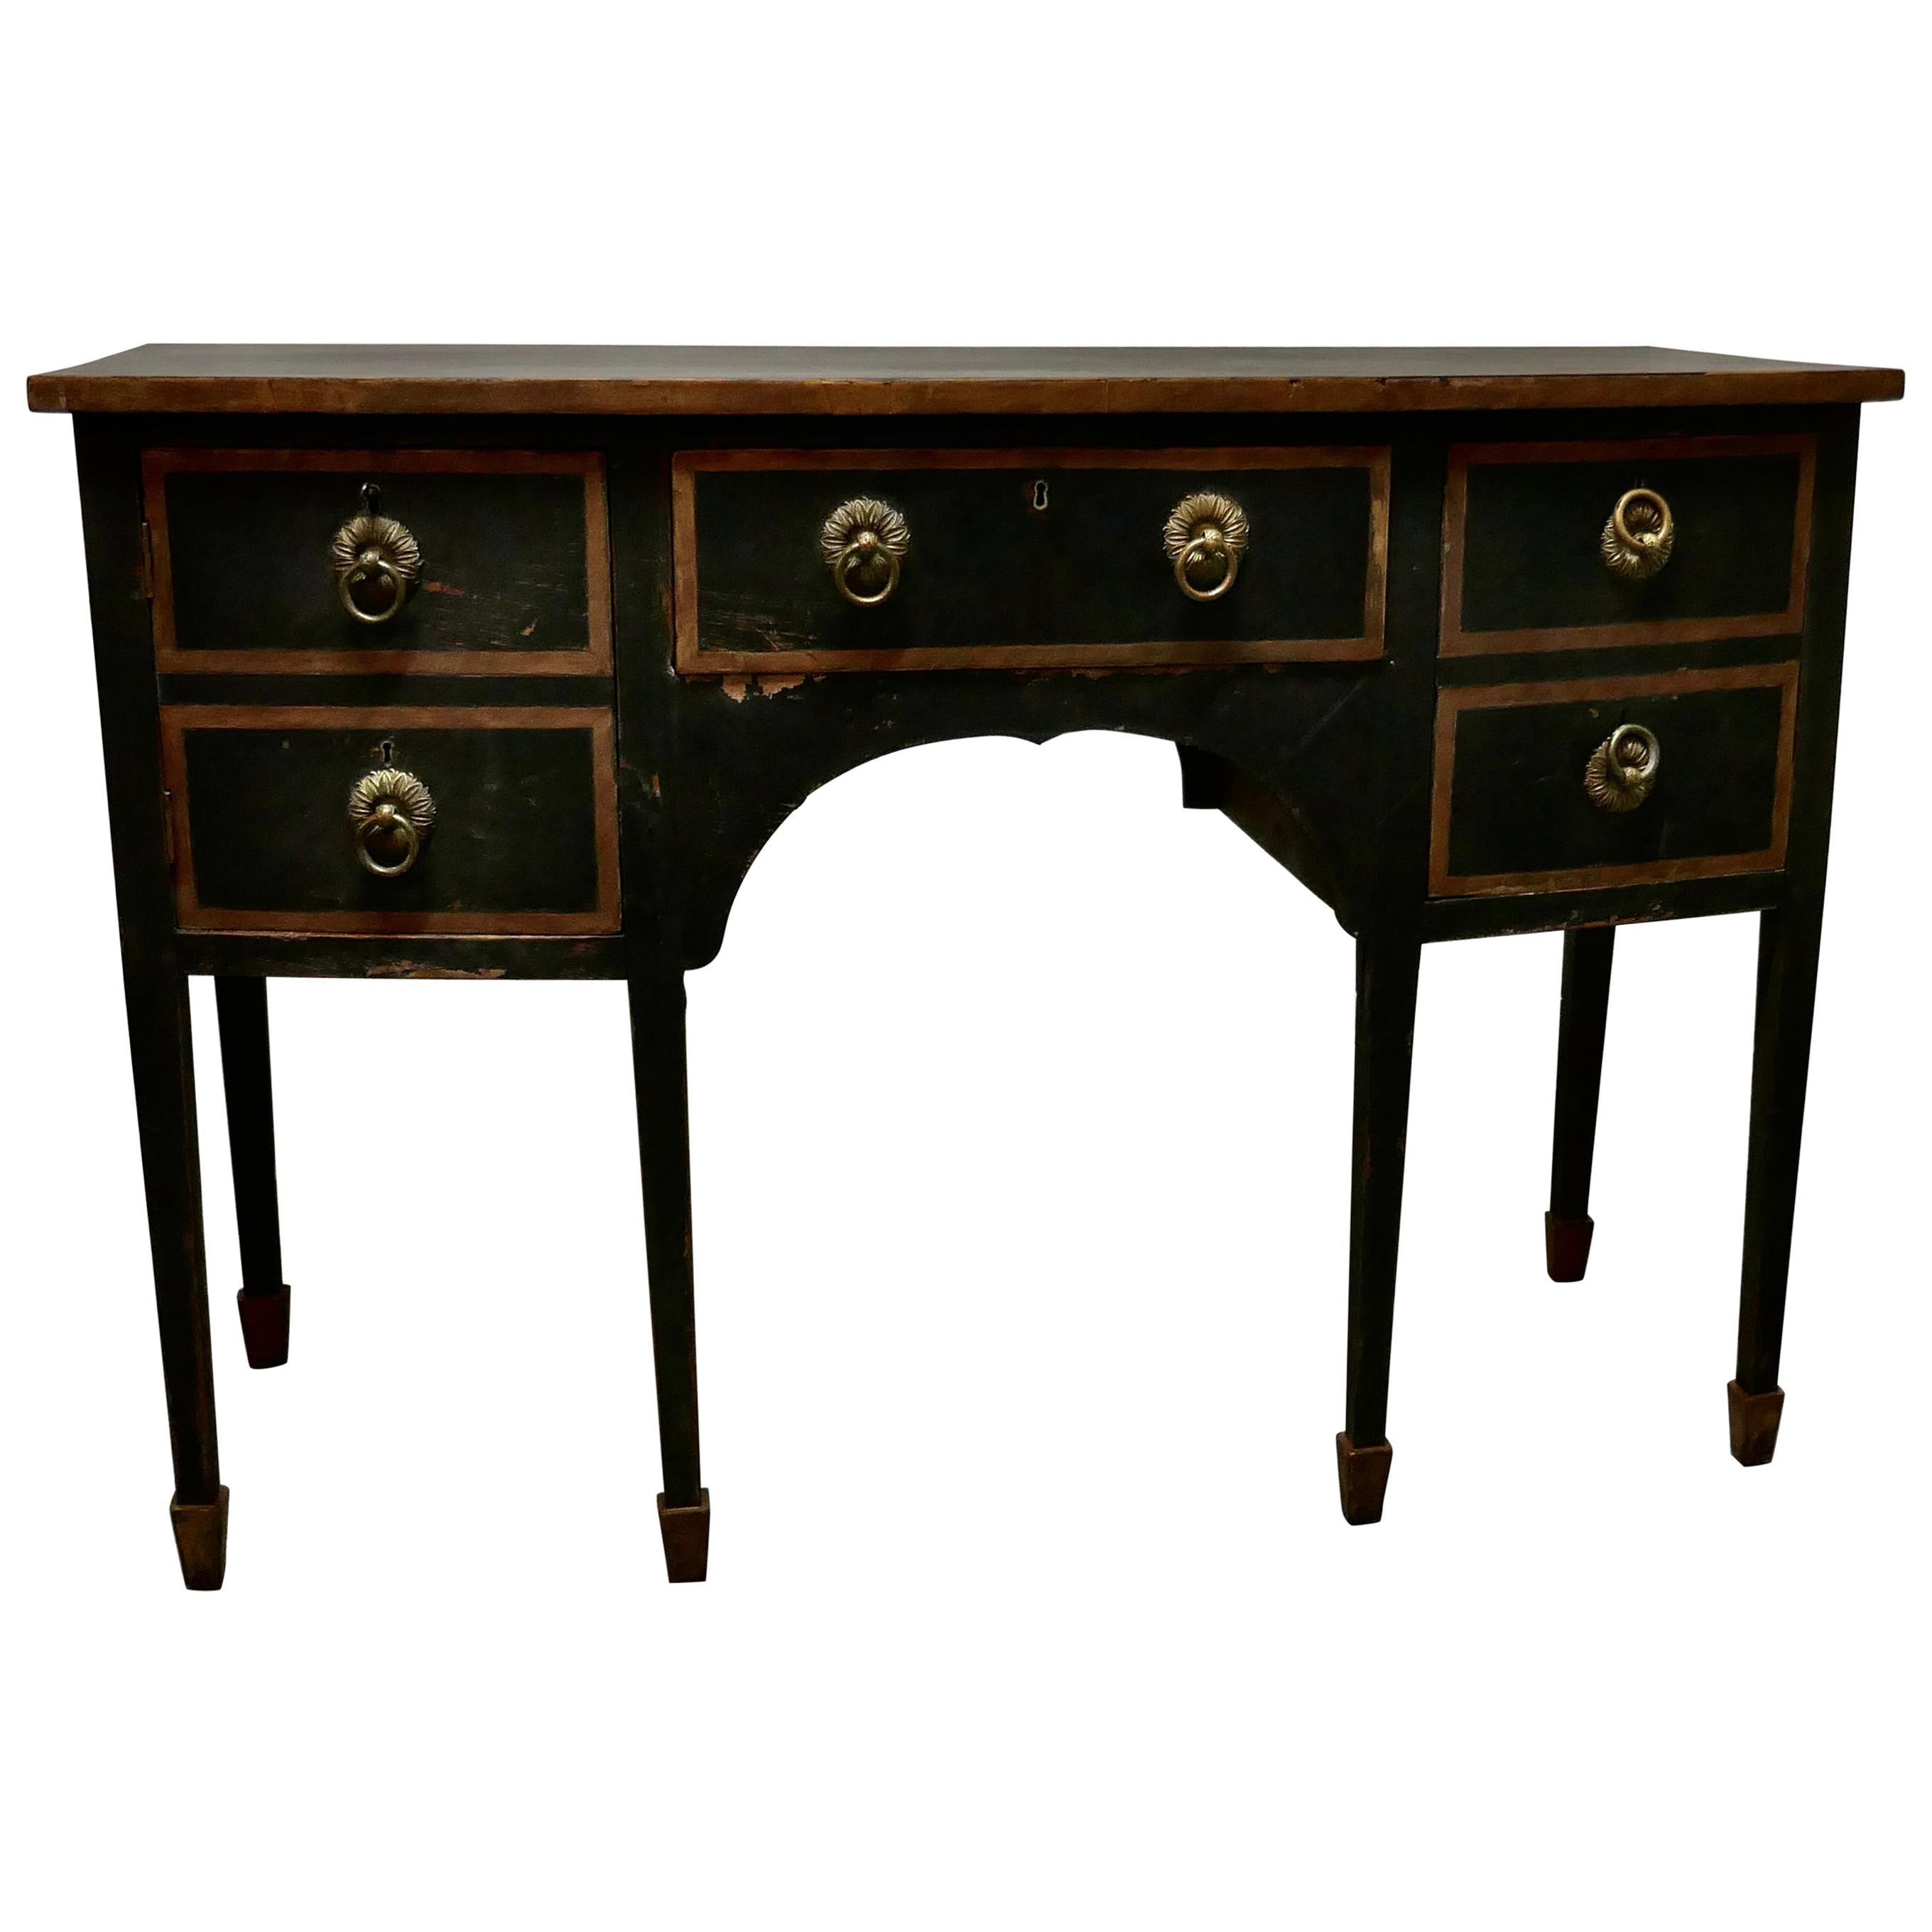 Black and Gold Regency Bow Front Serving Table, with Cellerette For Sale